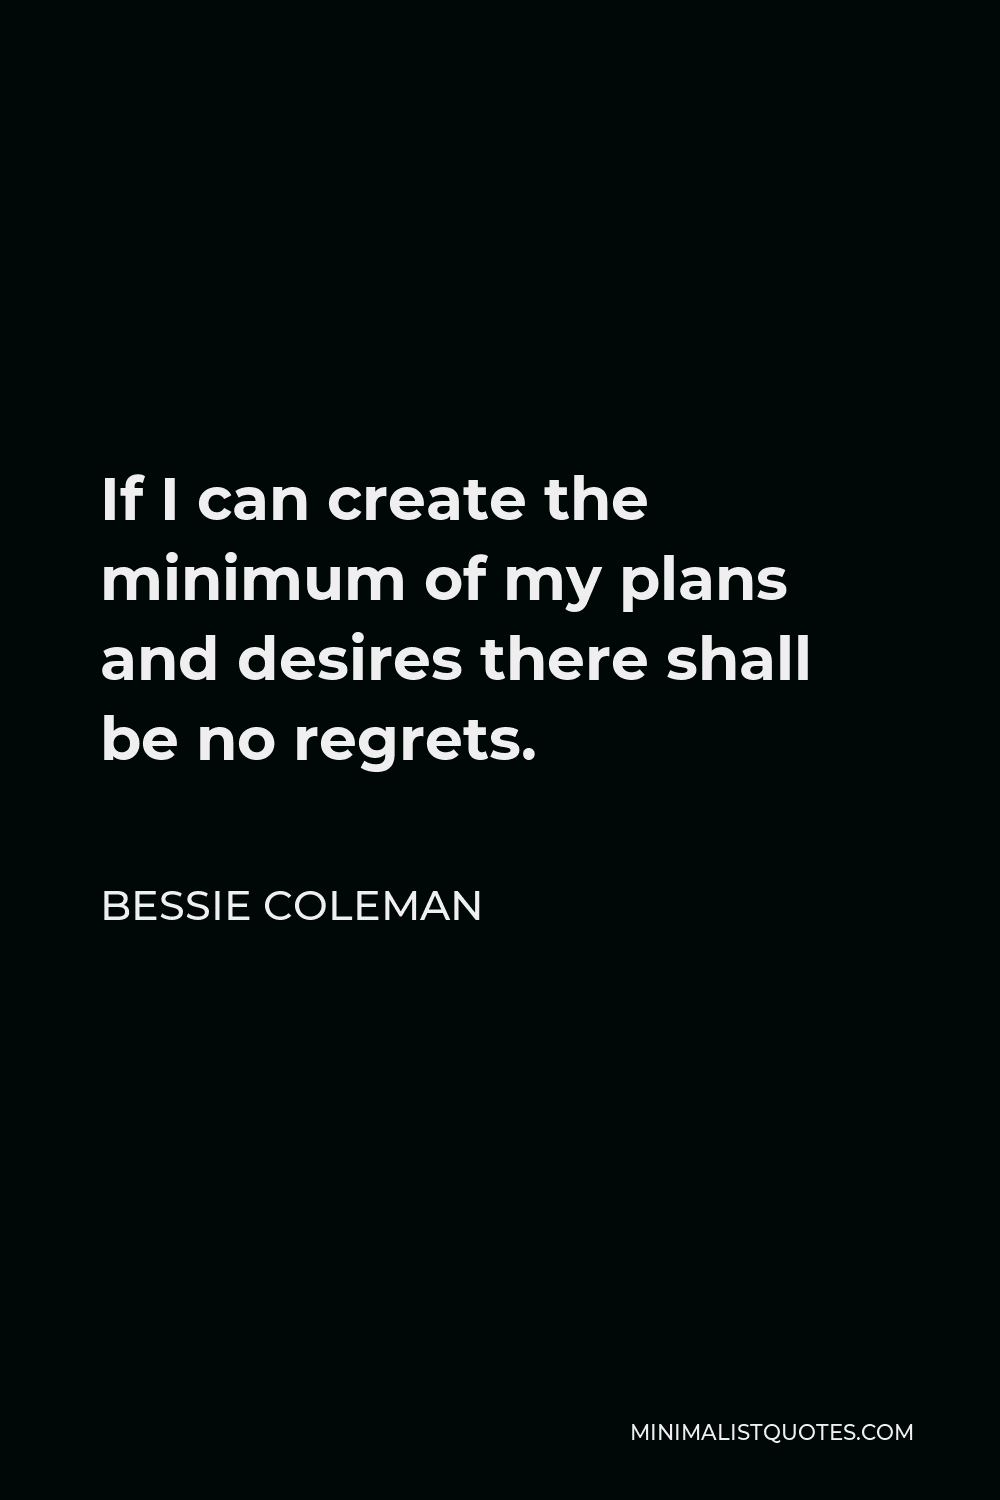 Bessie Coleman Quote - If I can create the minimum of my plans and desires there shall be no regrets.